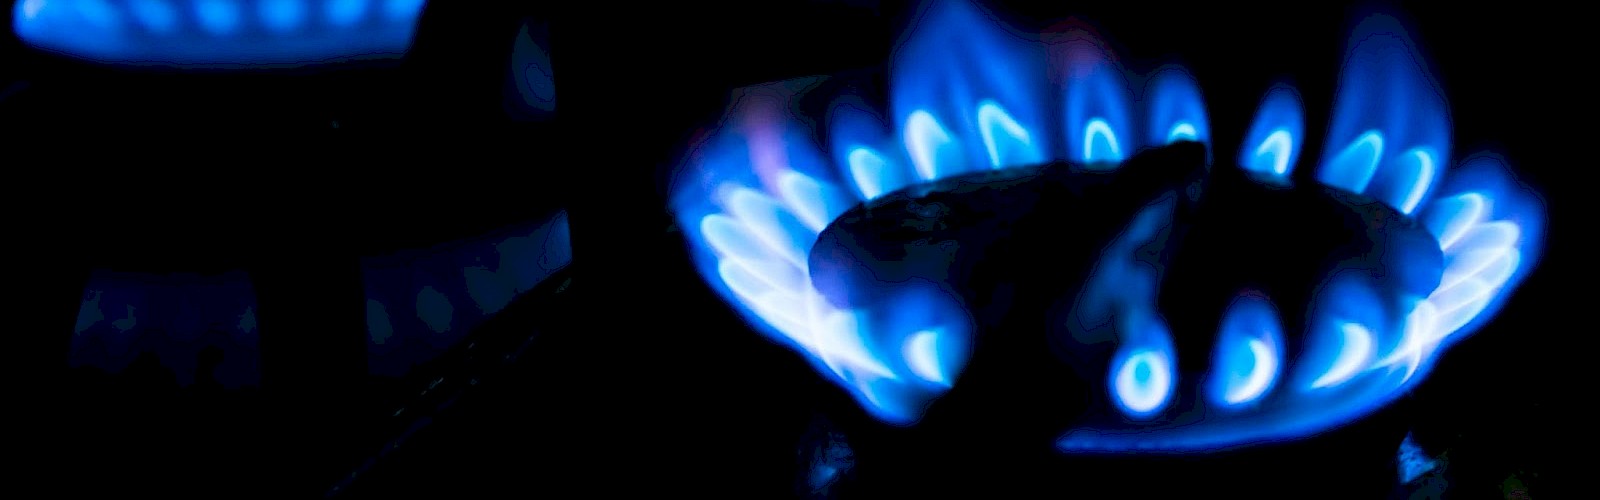 My boiler smells of gas - What should I do?